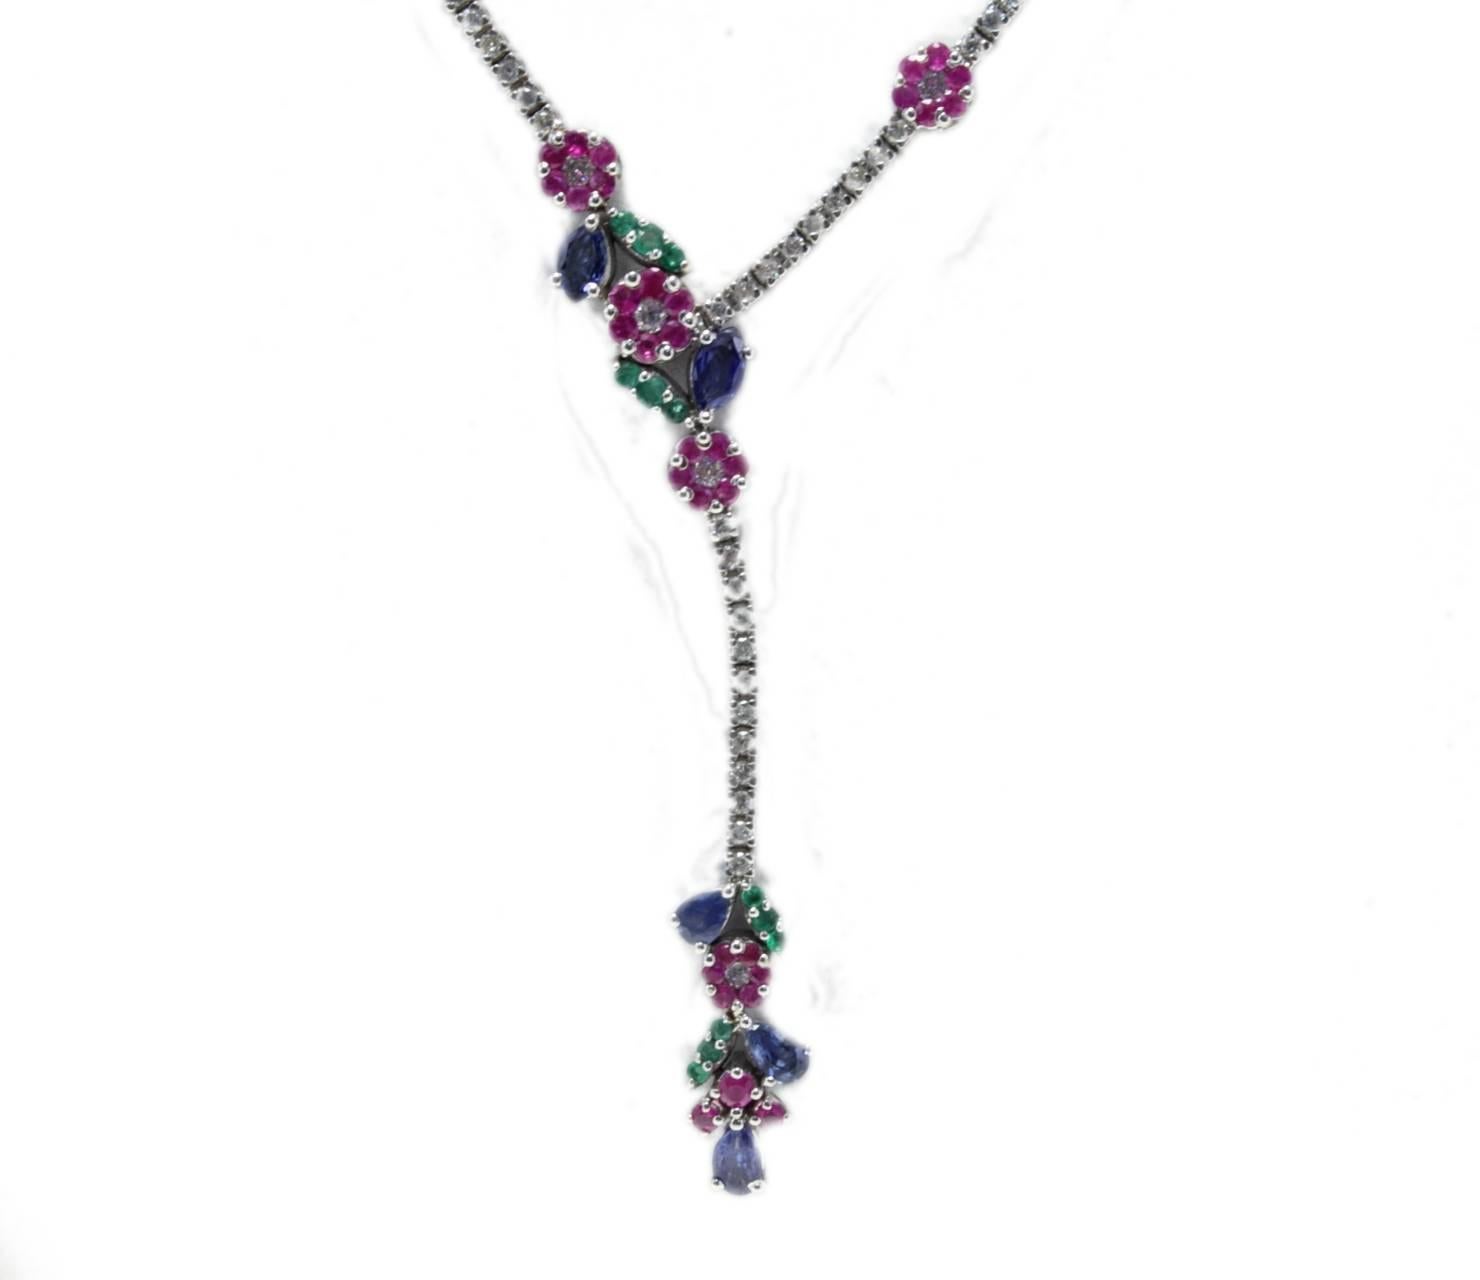 Fascinating necklace  and earrings composed of diamonds string  with a little flowers of rubies, emeralds and blue sapphire on it, and a different design for the top of the string only in shiny 18K white gold. 
Tot weight Necklace 18.6 g
Diamonds